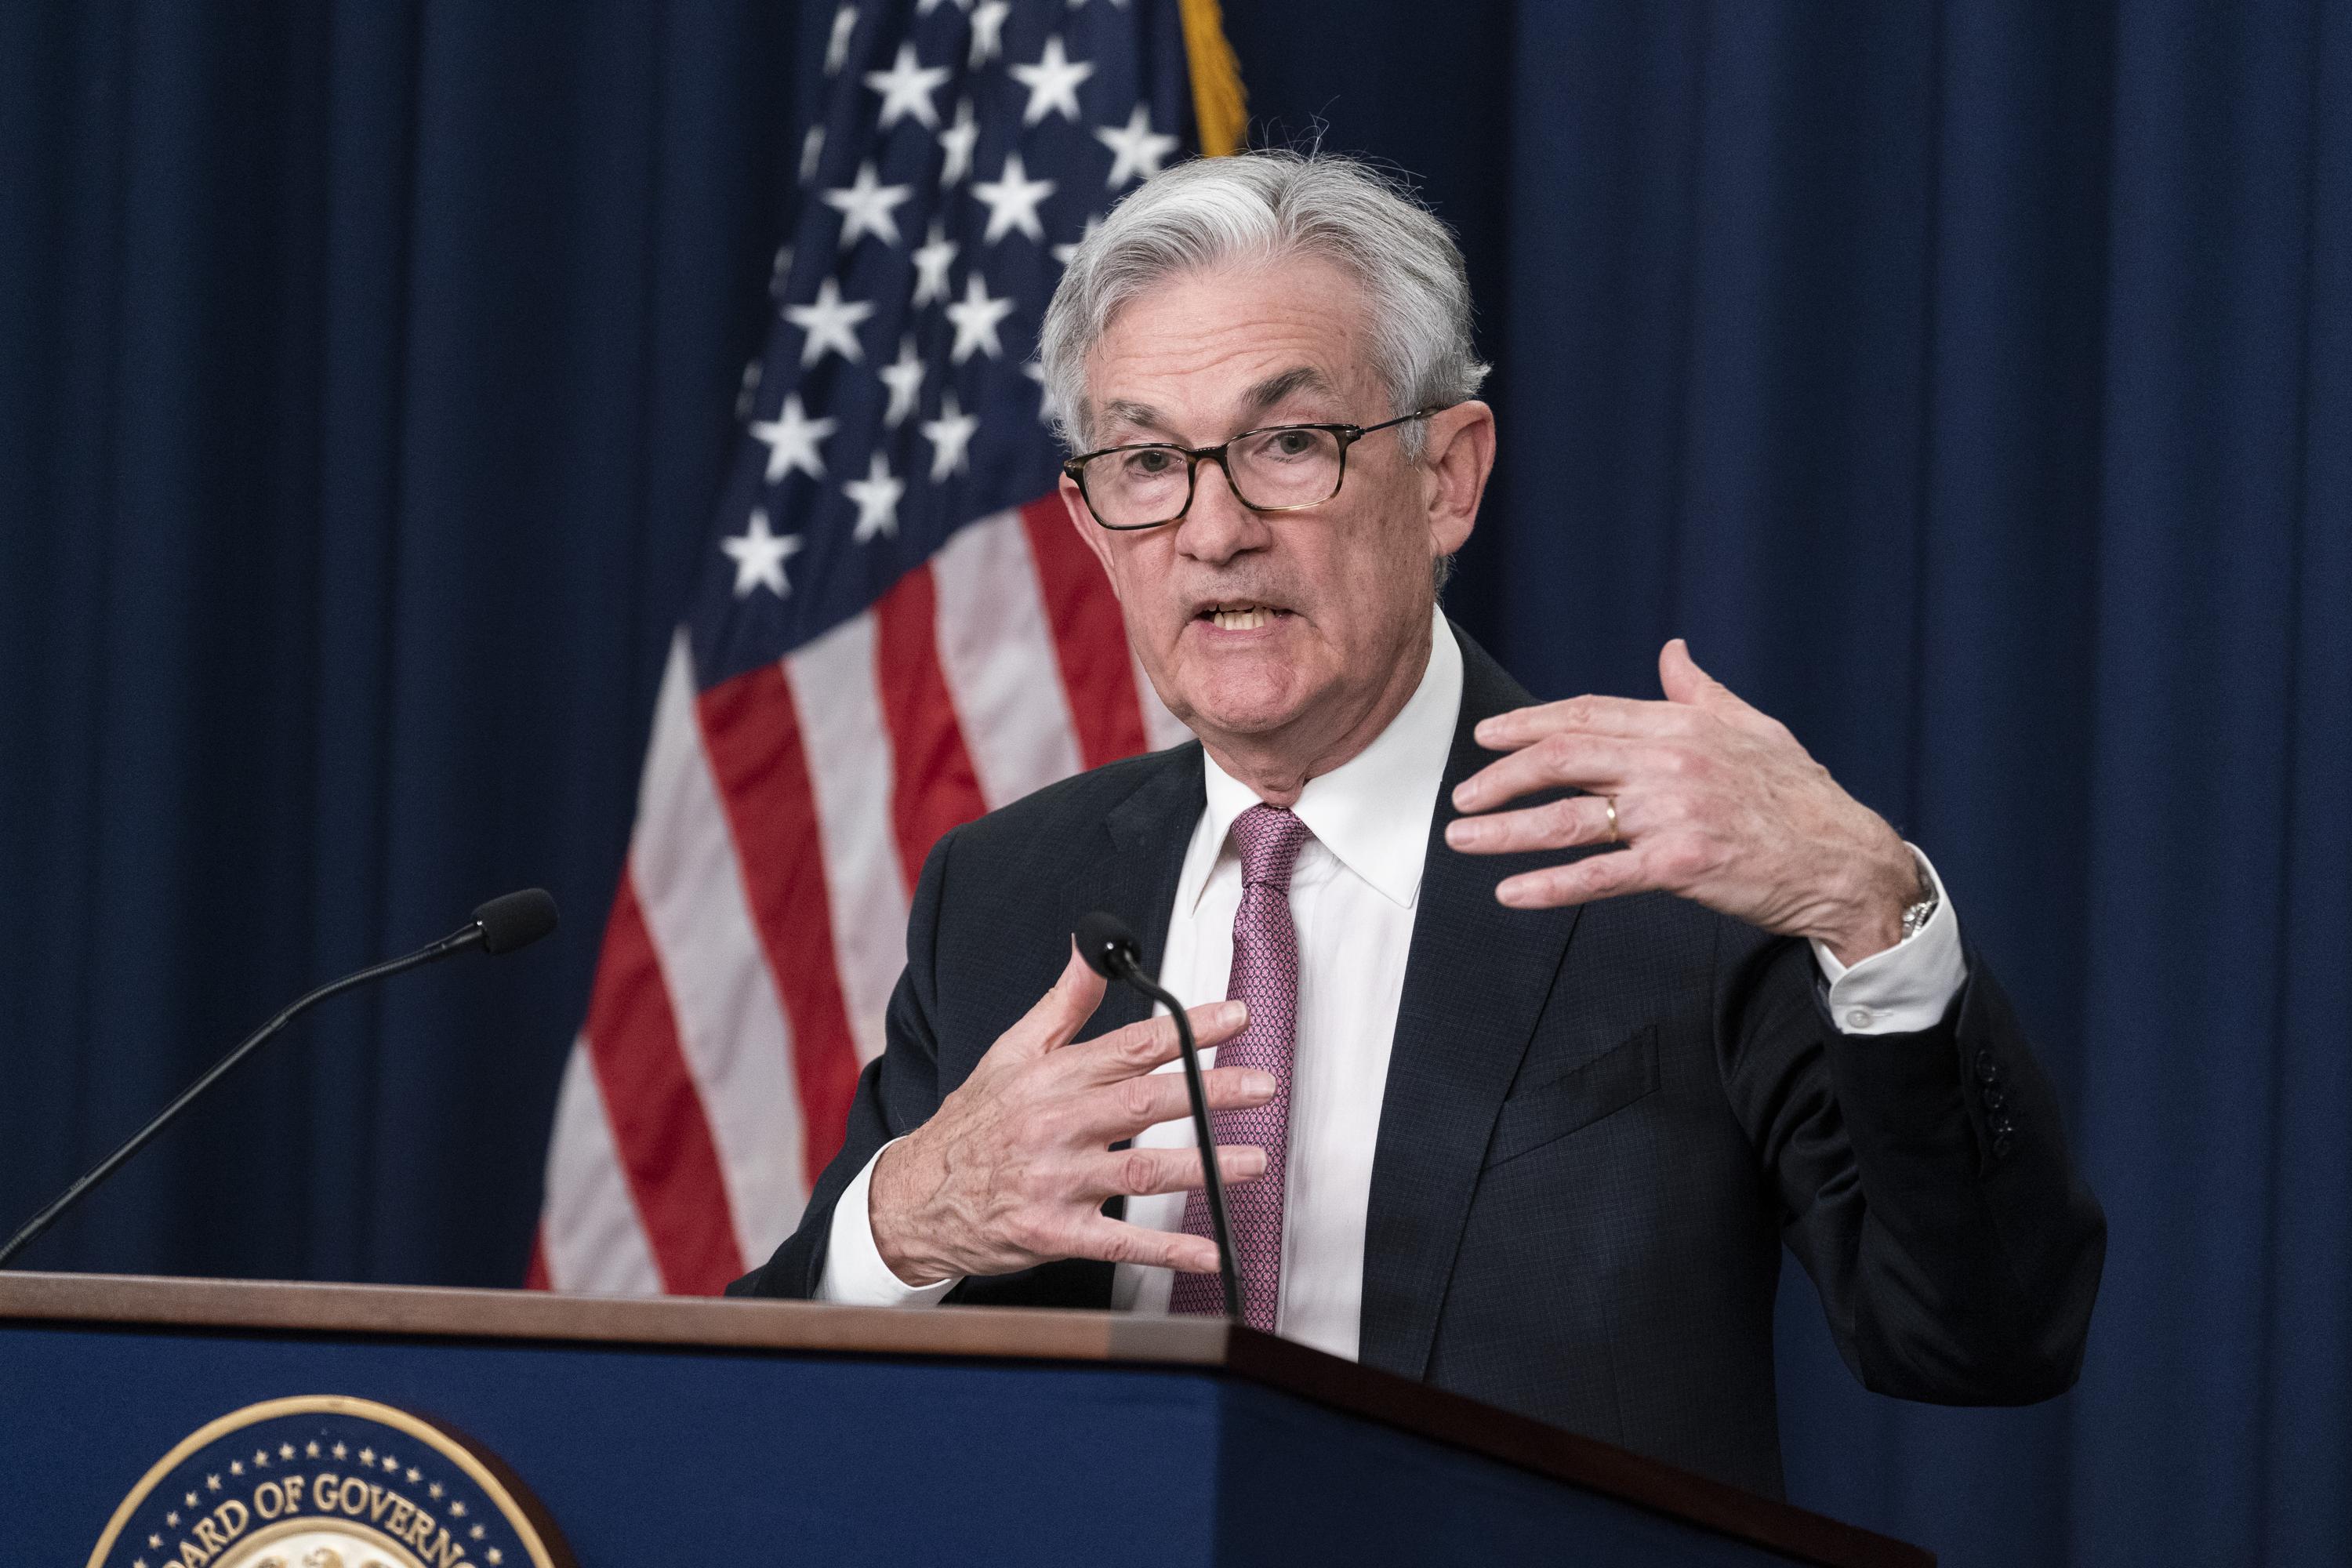 The Senate confirms Powell for the second term while the Fed fights inflation